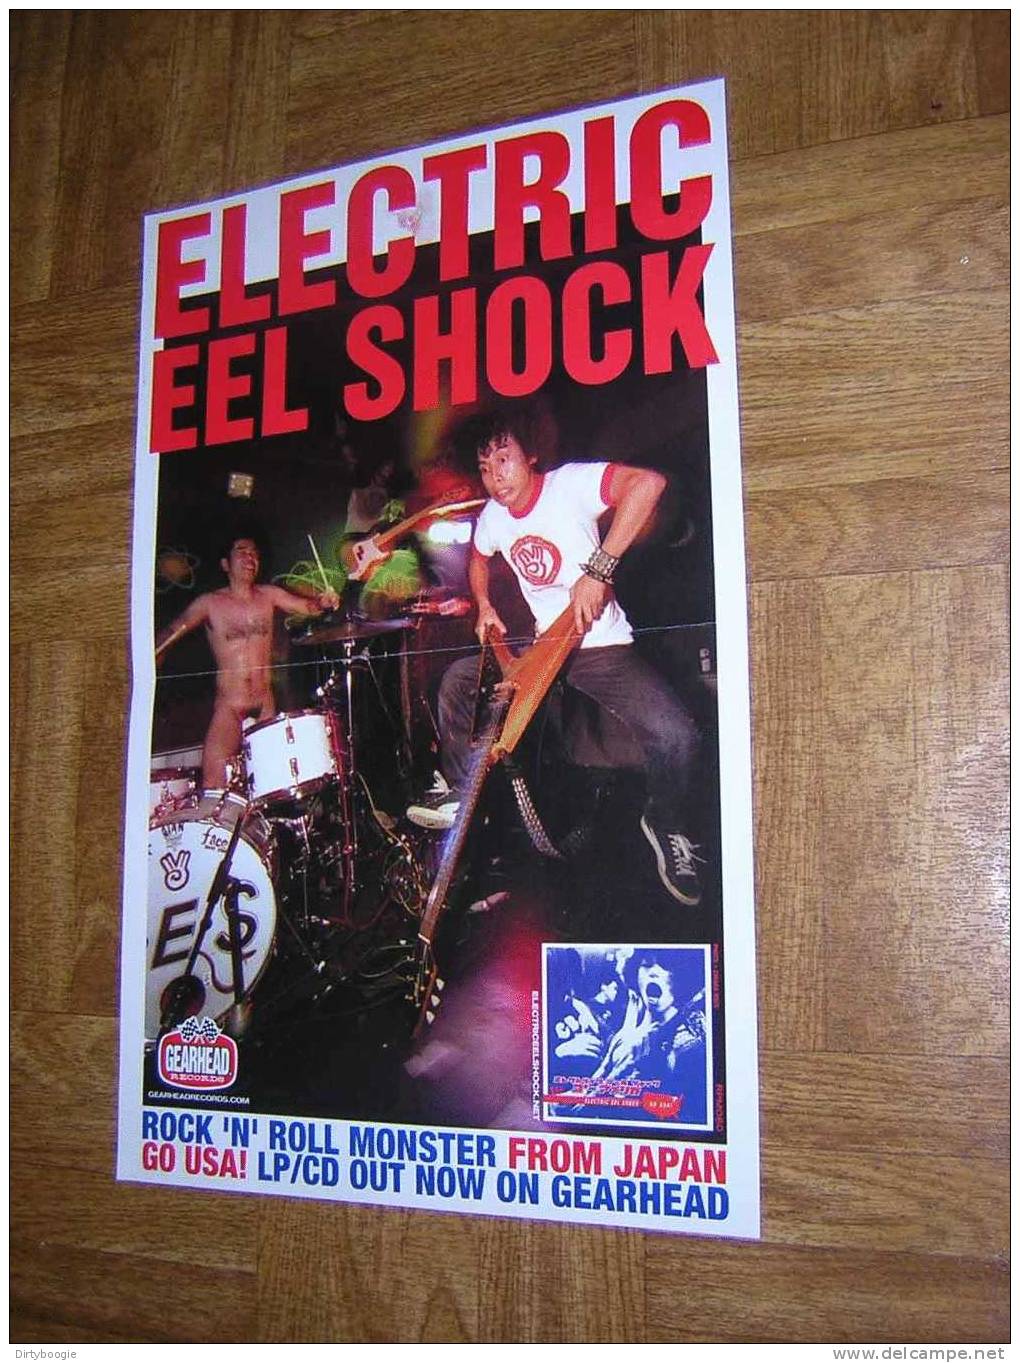 ELECTRIC EEL SHOCK - AFFICHETTE - ROCK'N'ROLL MONSTER FROM JAPAN - GEARHEAD RECORDS - Plakate & Poster